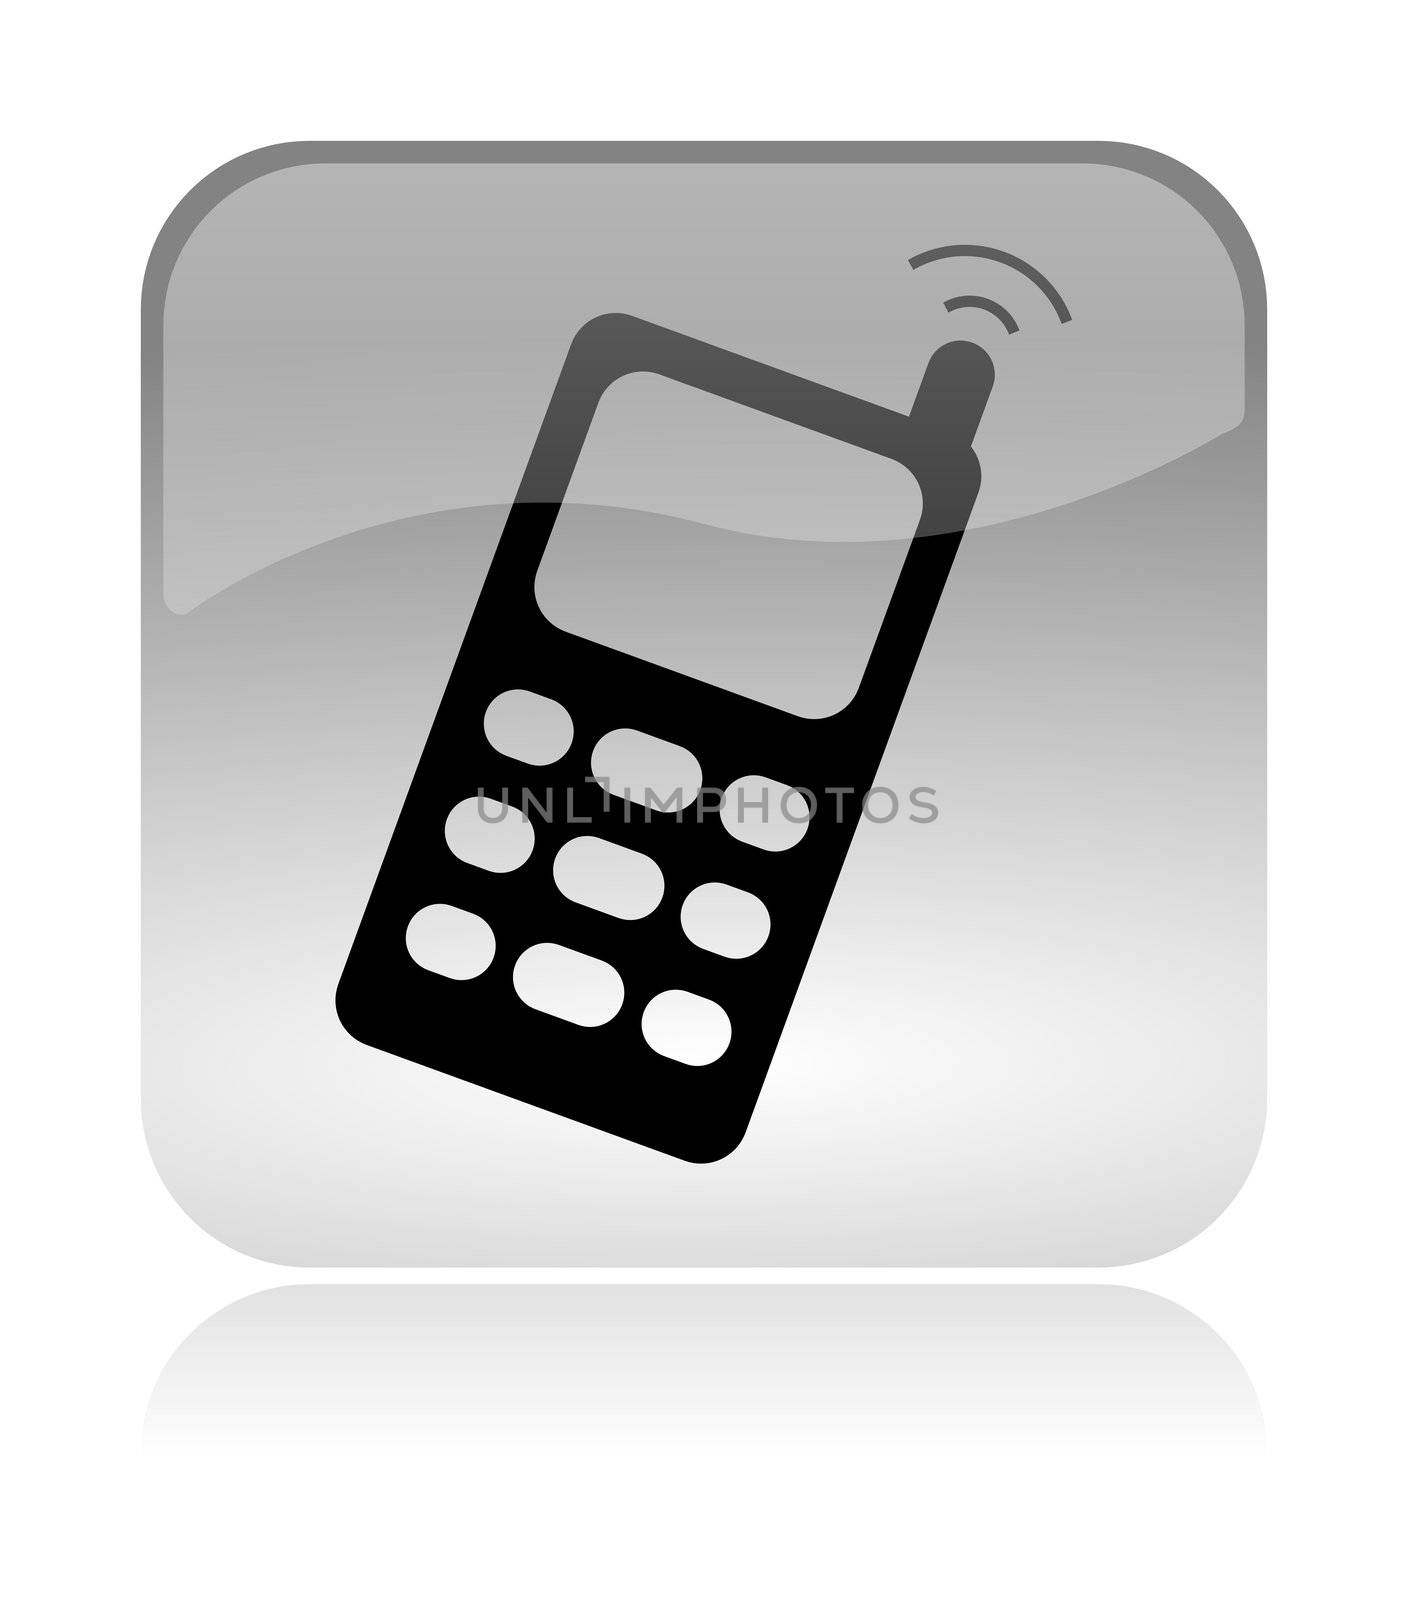 cellular mobile phone web interface icon by make